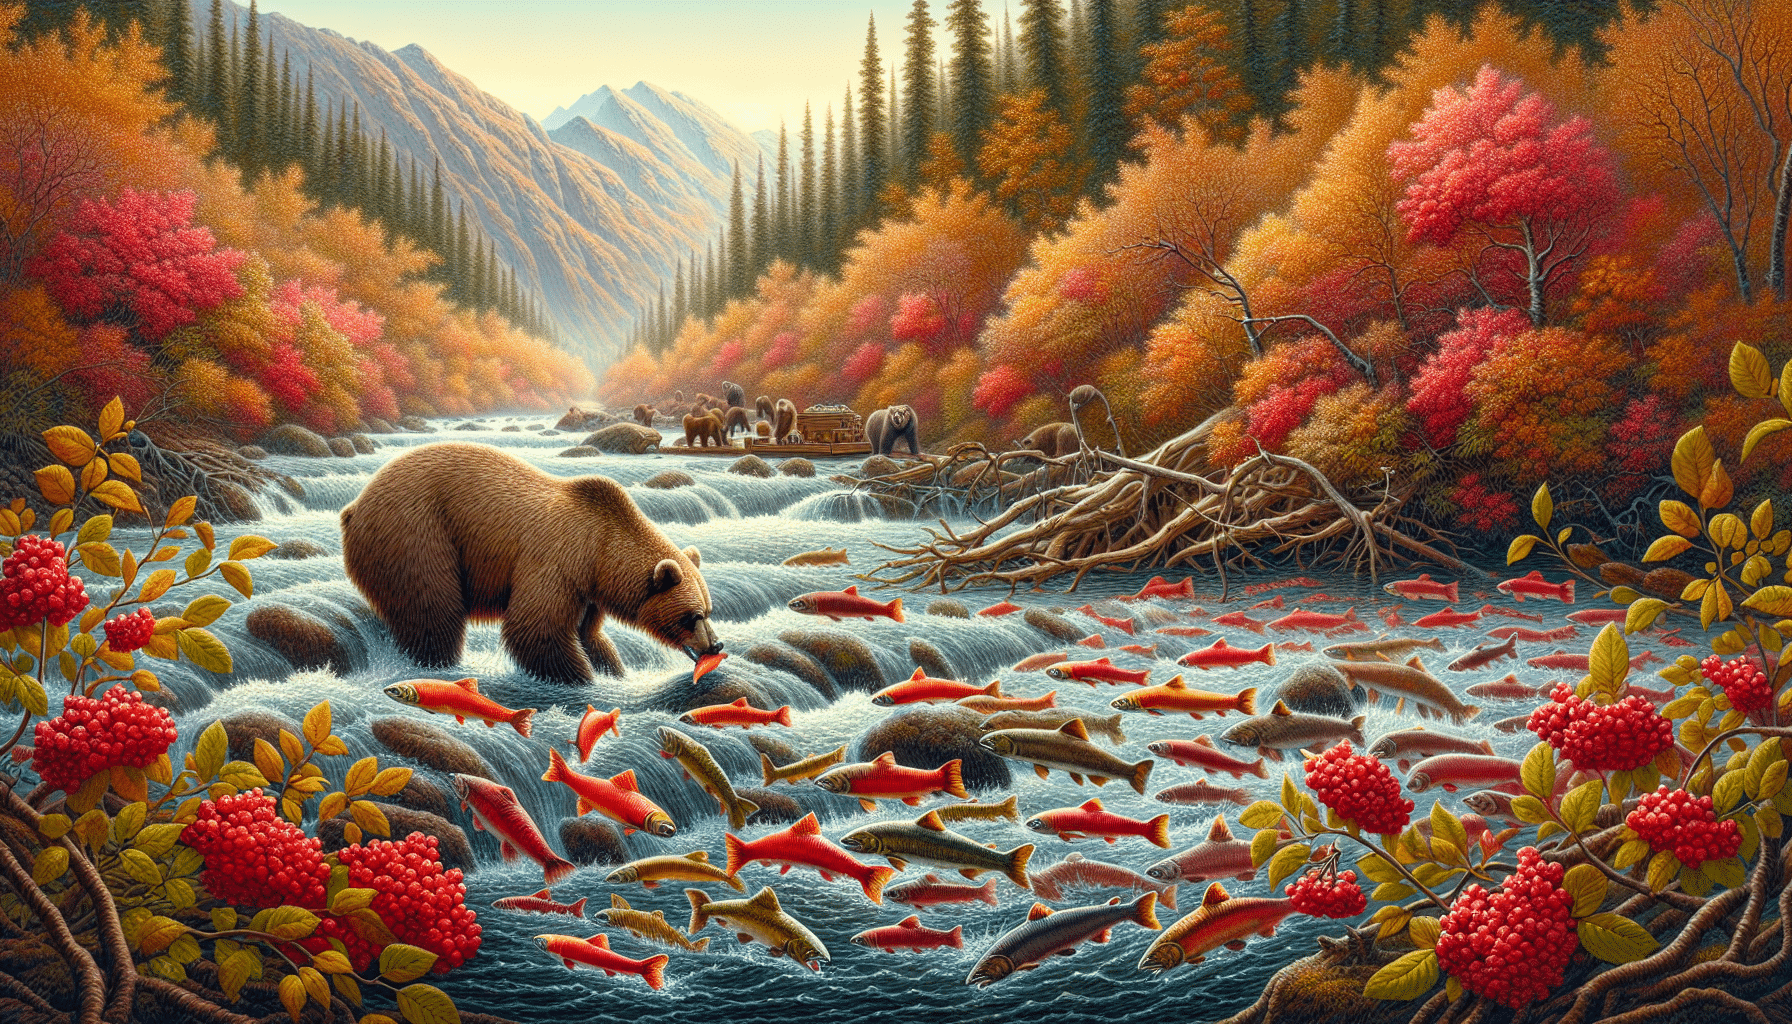 A detailed depiction of the wilderness during autumn. Focus on a brown bear foraging for food, specifically showing it near a slow-moving river packed with salmon attempting to swim upstream. The salmon should be vividly colored, showcasing their reddish hue during the breeding season. Meanwhile, the bear is poised to catch a leaping salmon right out of the water. In the background, show smatterings of colorful berries on nearby bushes embraced by the fall foliage, suggesting other potential food sources. Exclude the presence of any human-made objects or people, as well as any brand names and logos.